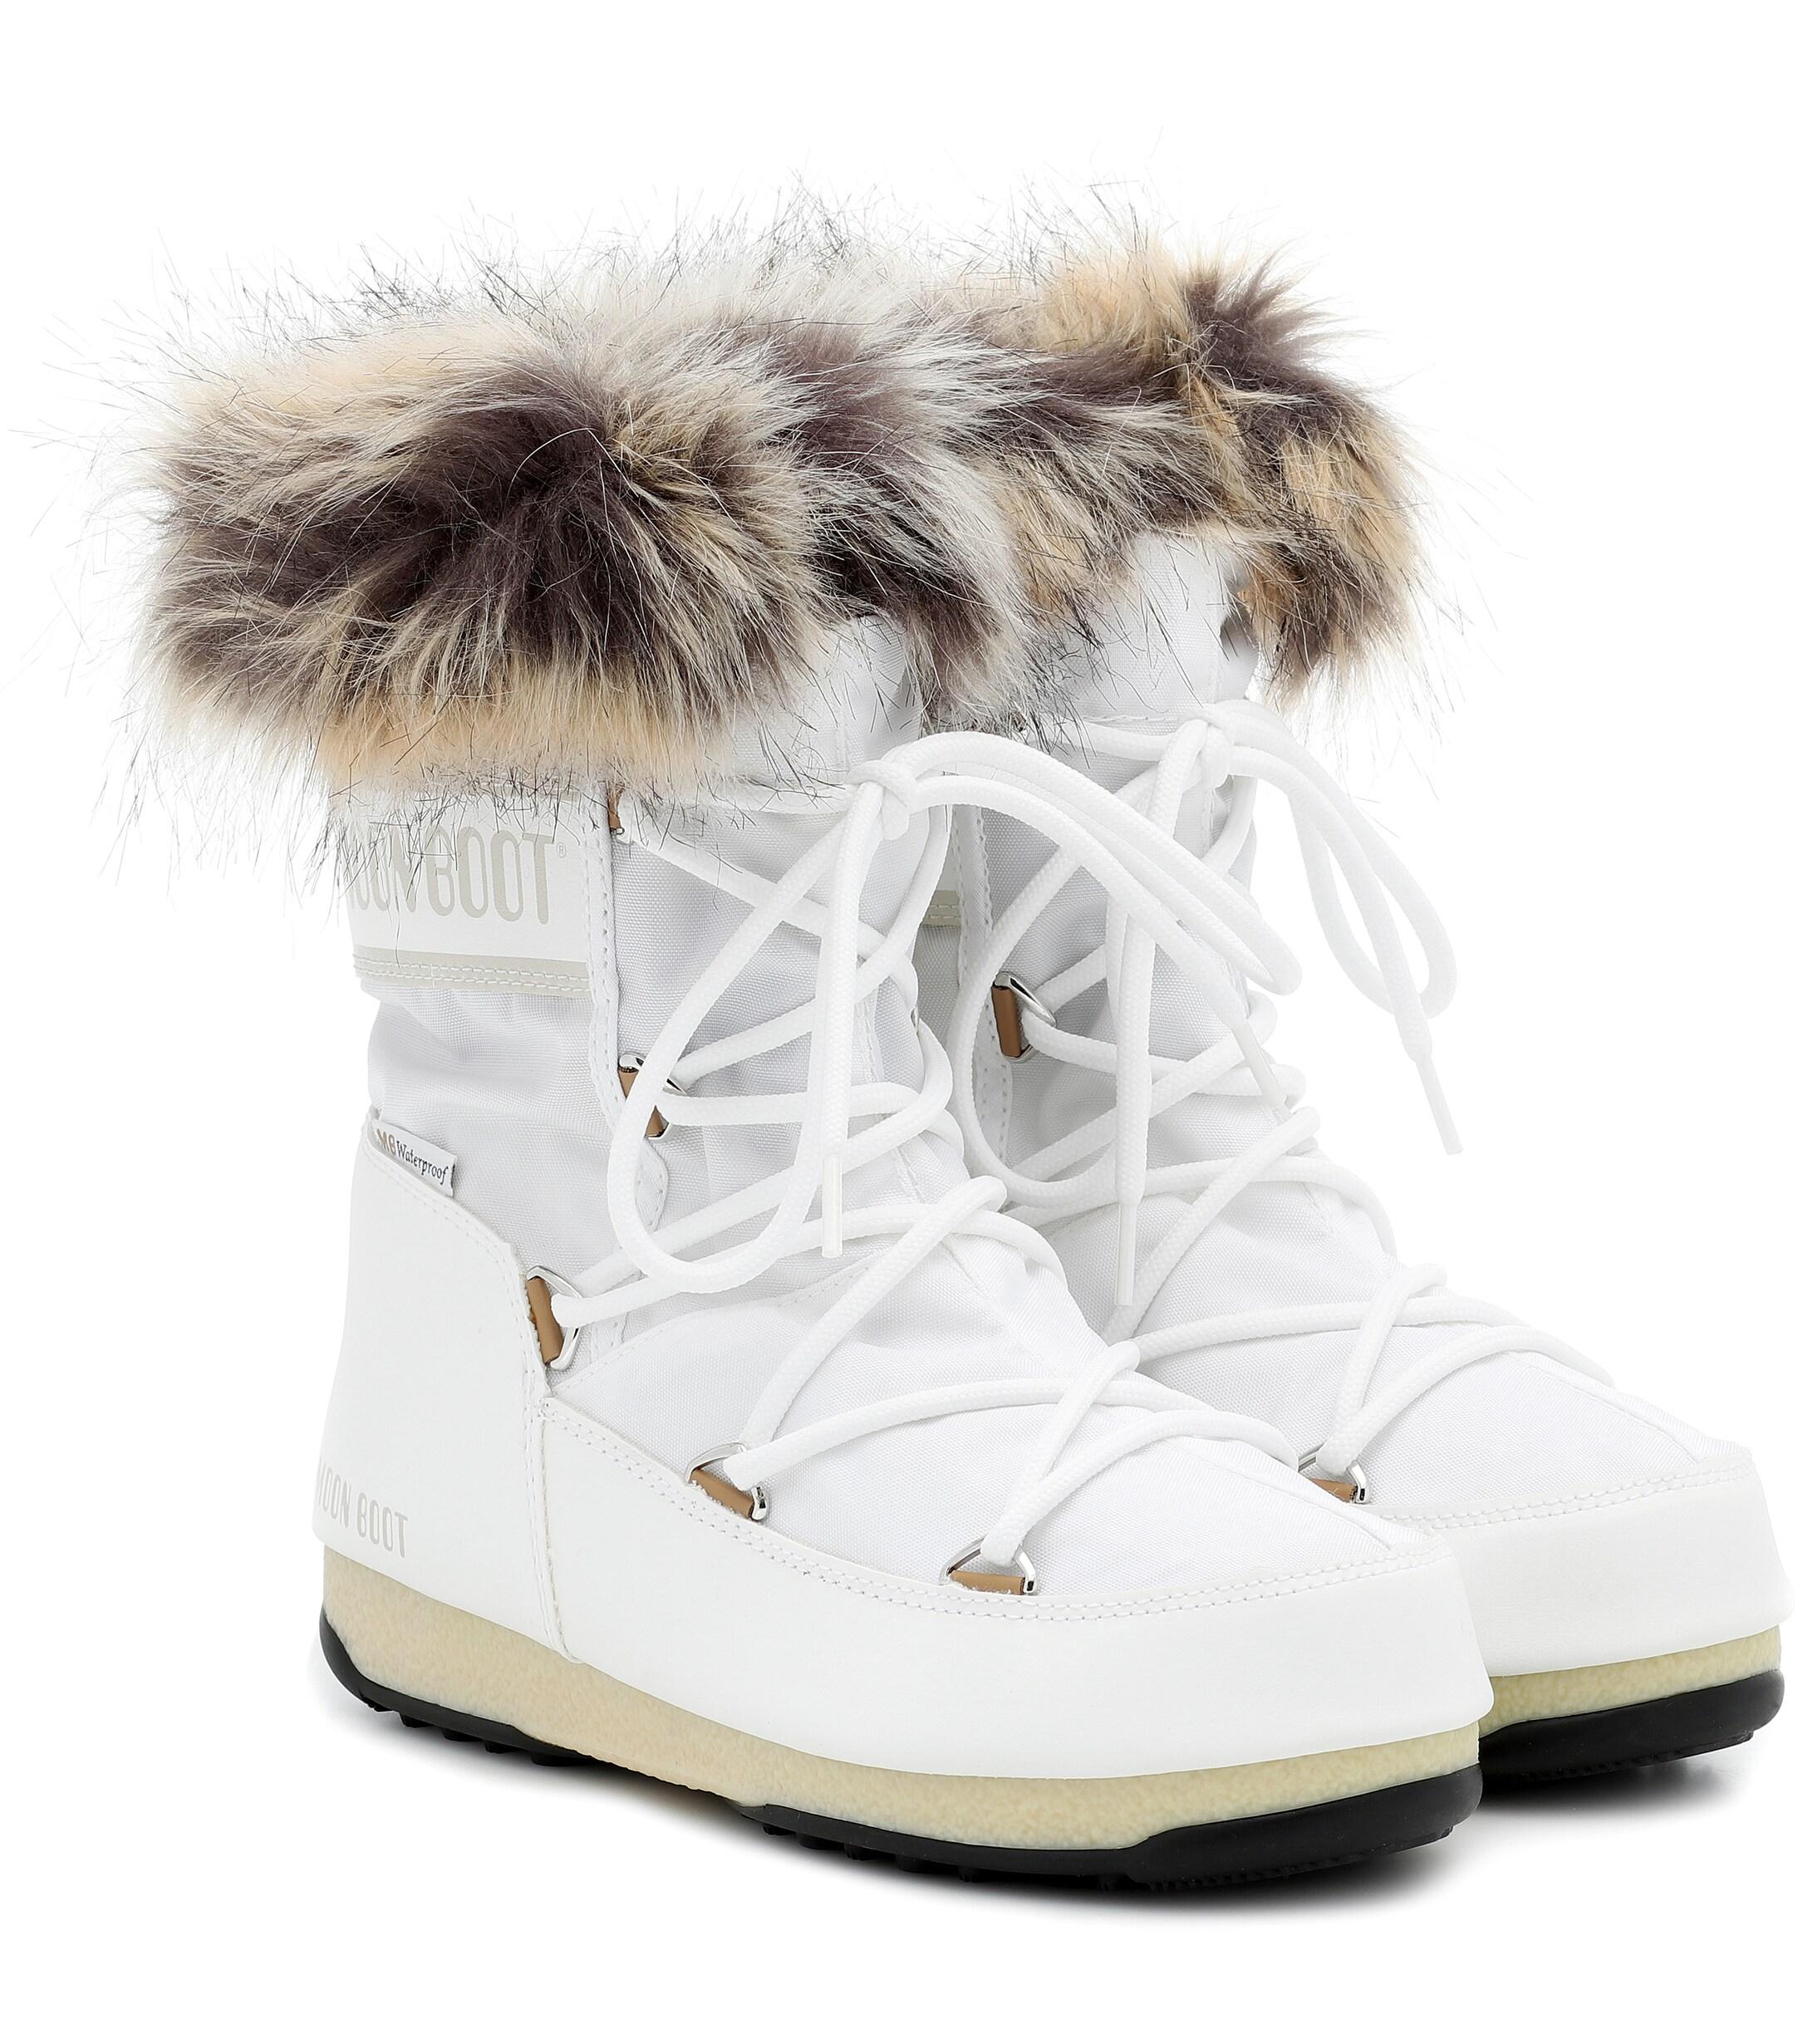 Moon Boot Monaco Low Wp 2 Snow Boots in White | Lyst